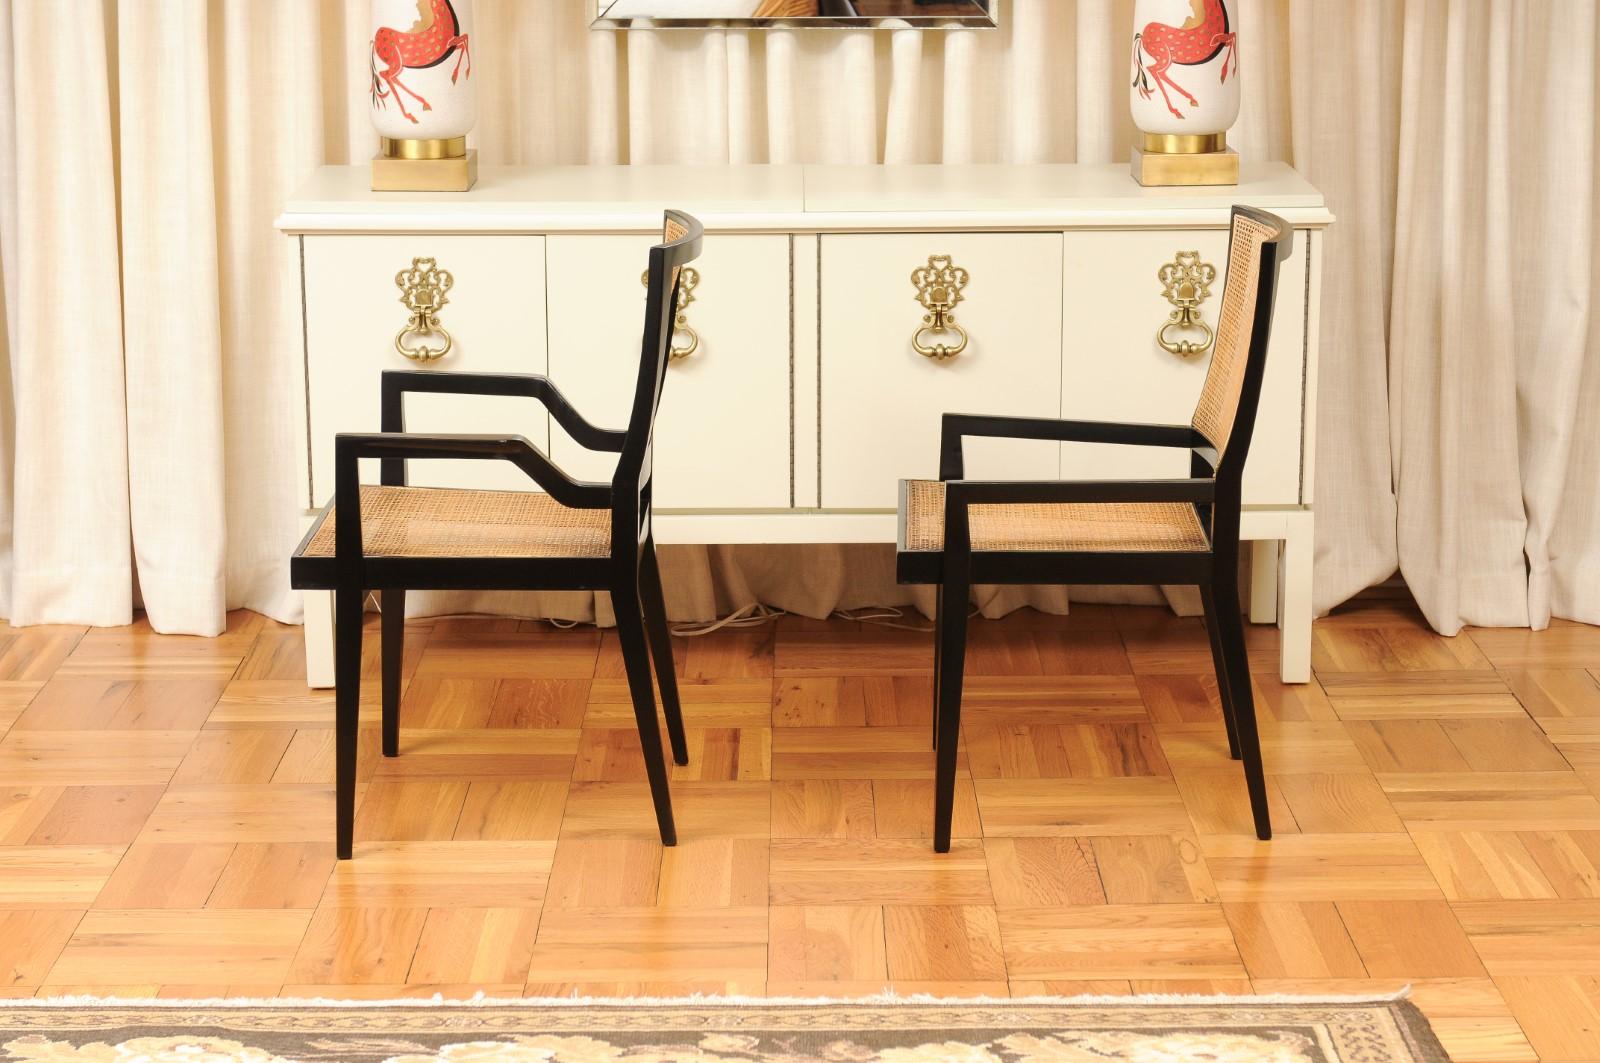 Spectacular Restored Set of 14 Sleek Double Cane Dining Chairs by Michael Taylor For Sale 4